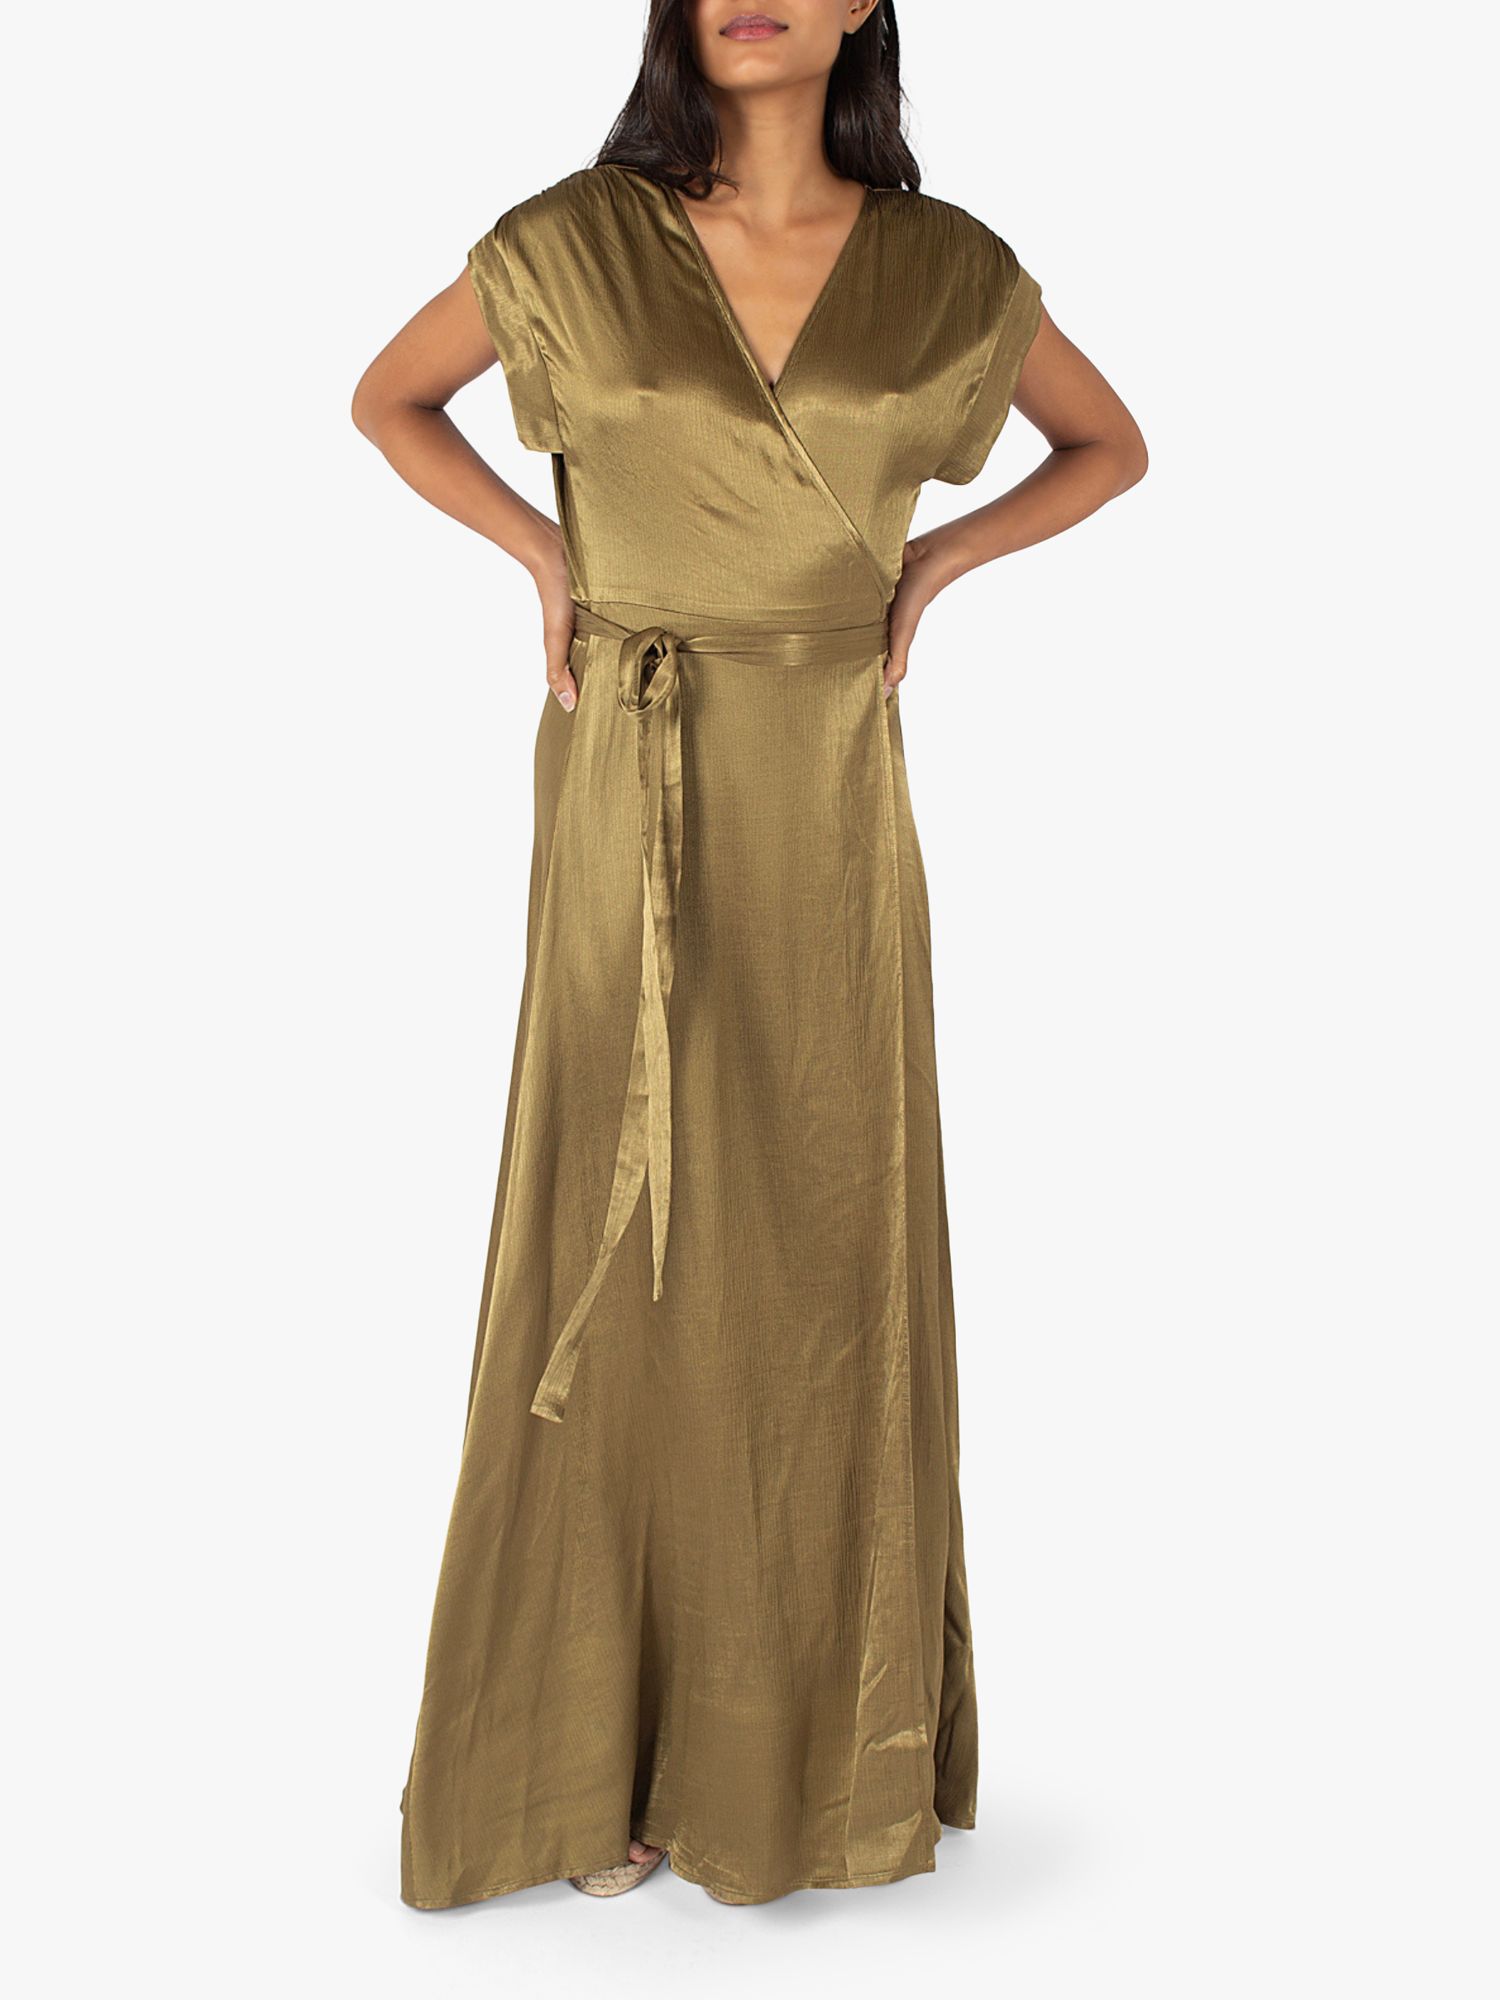 Traffic People Breathless Claude Wrap Maxi Dress, Olive, XS